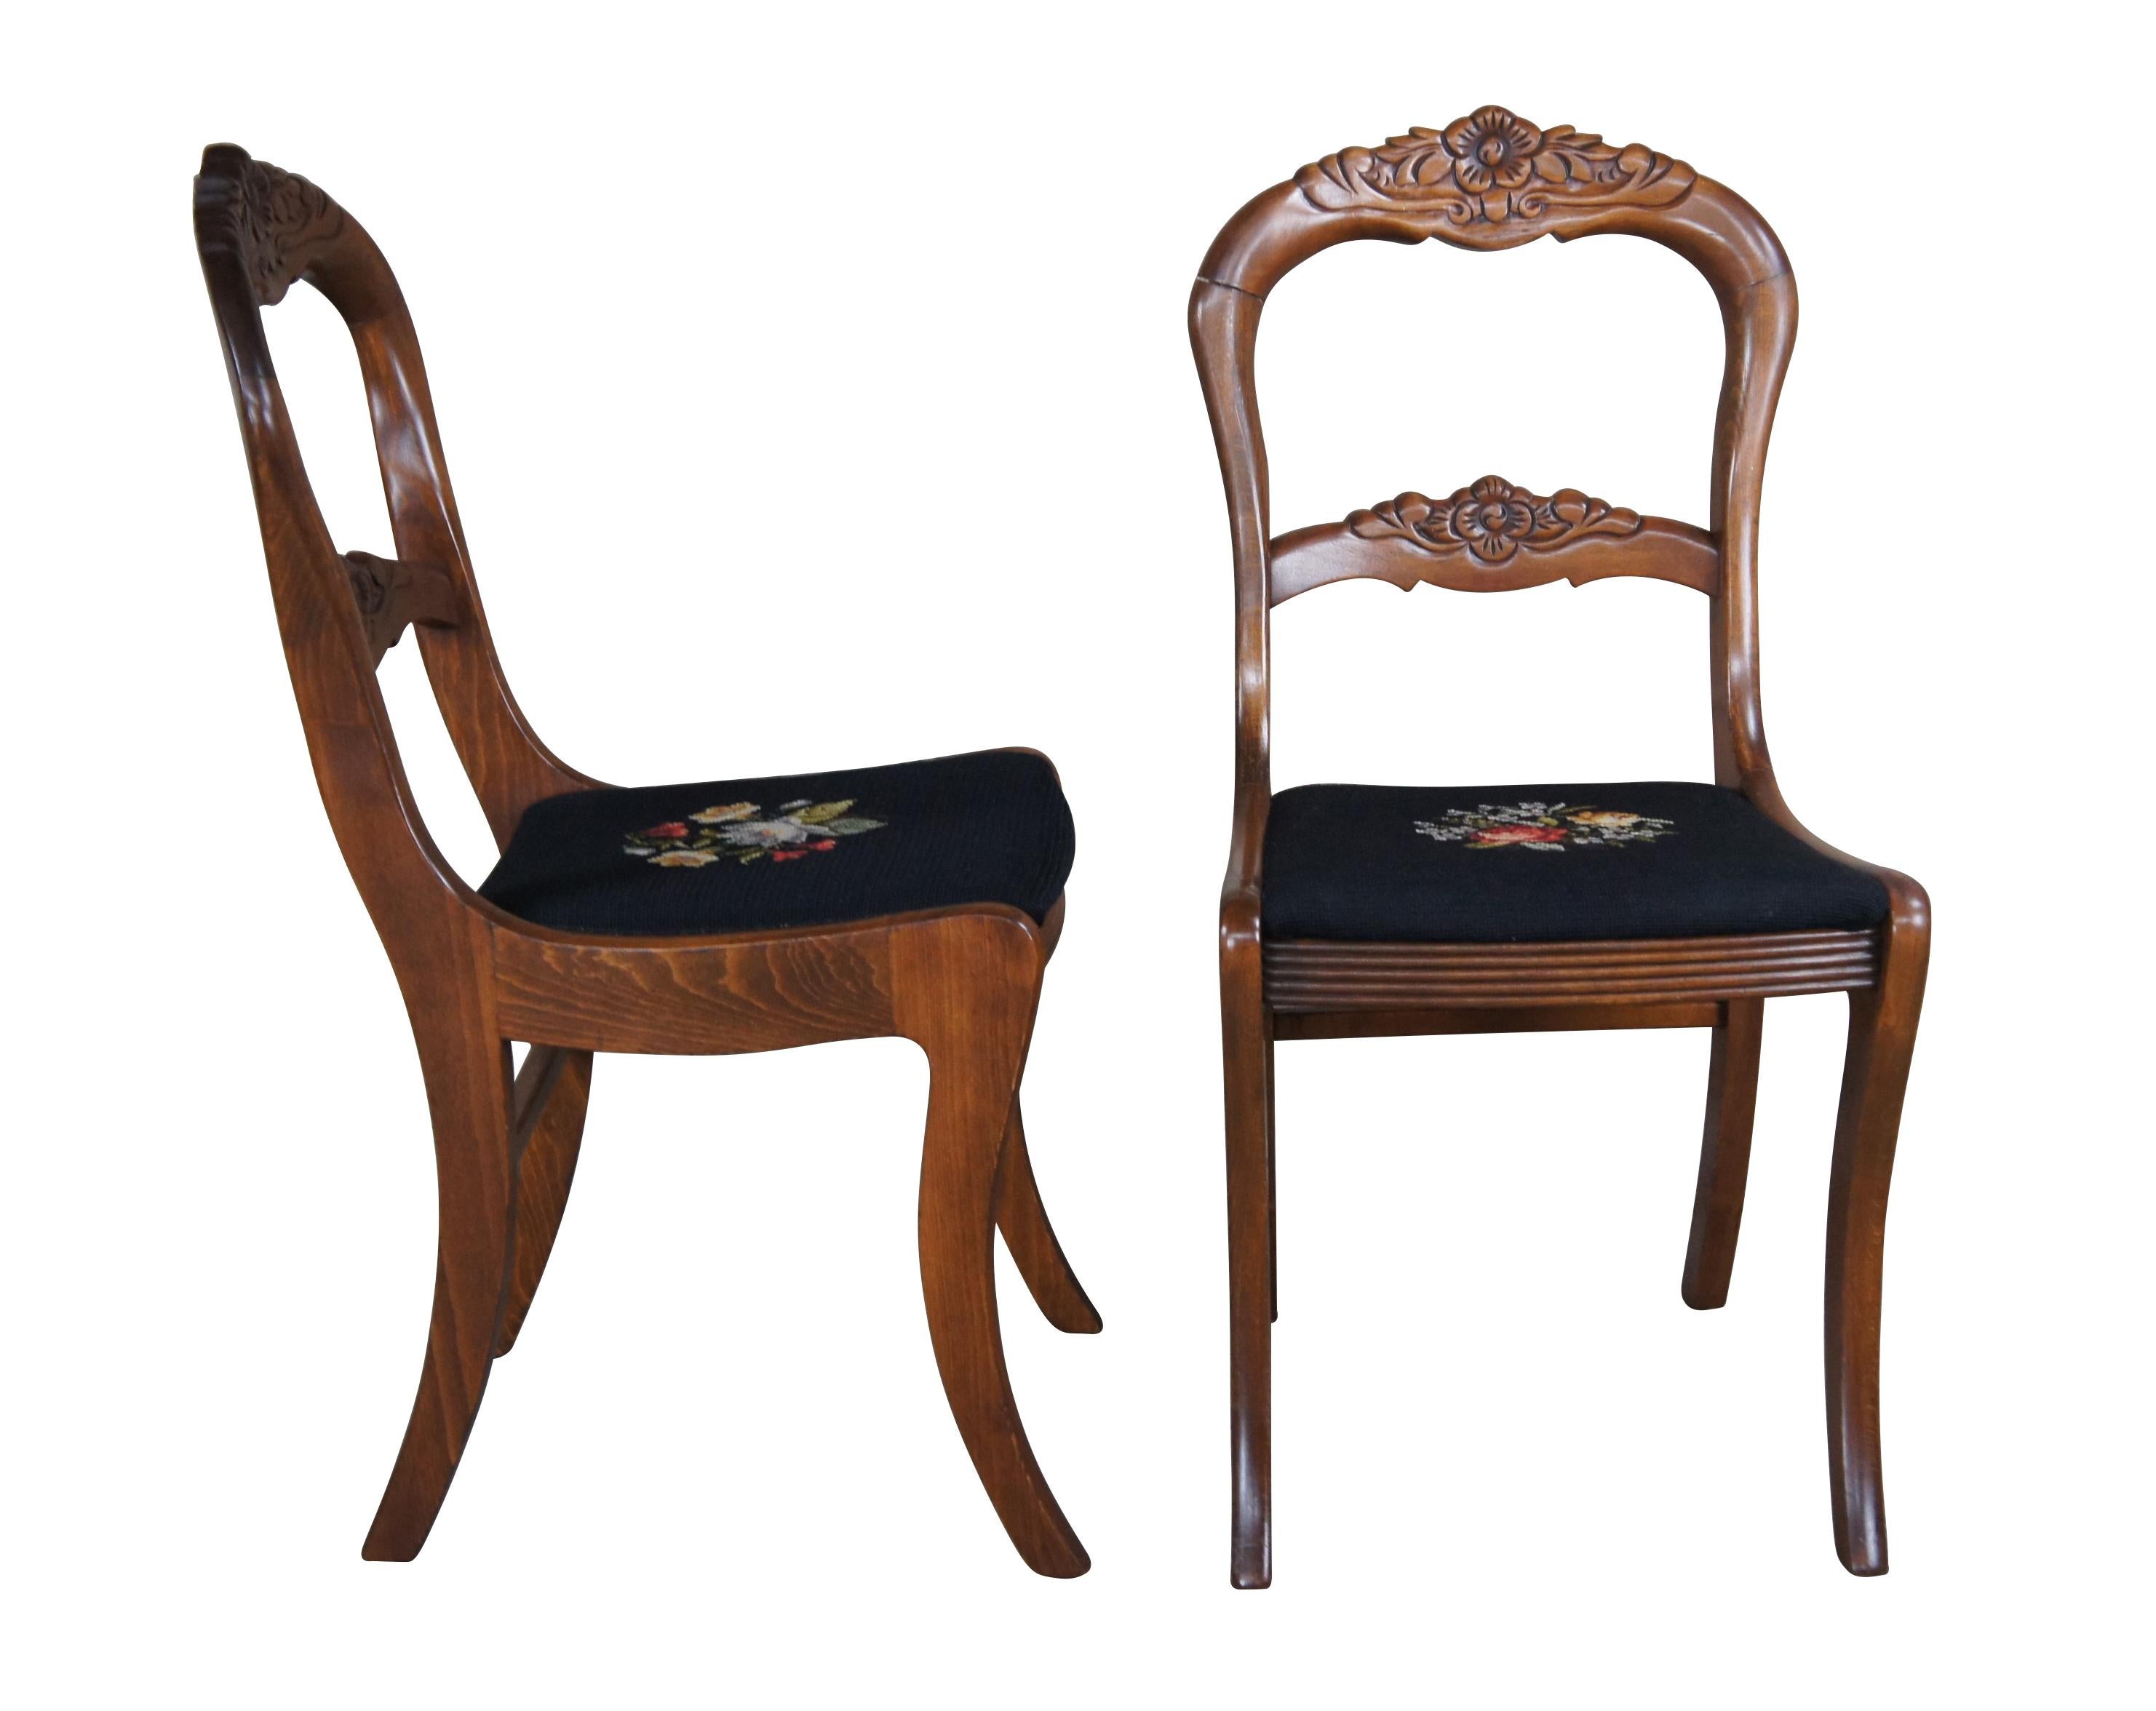 Six 1940s Tell City Duncan Phyfe / Balloon back style dining chairs.  Made of mahogany featuring carved floral design with black needlepoint seats.  Pattern 4563.

The Tell City Furniture Company, also known as the Tell City Chair company of